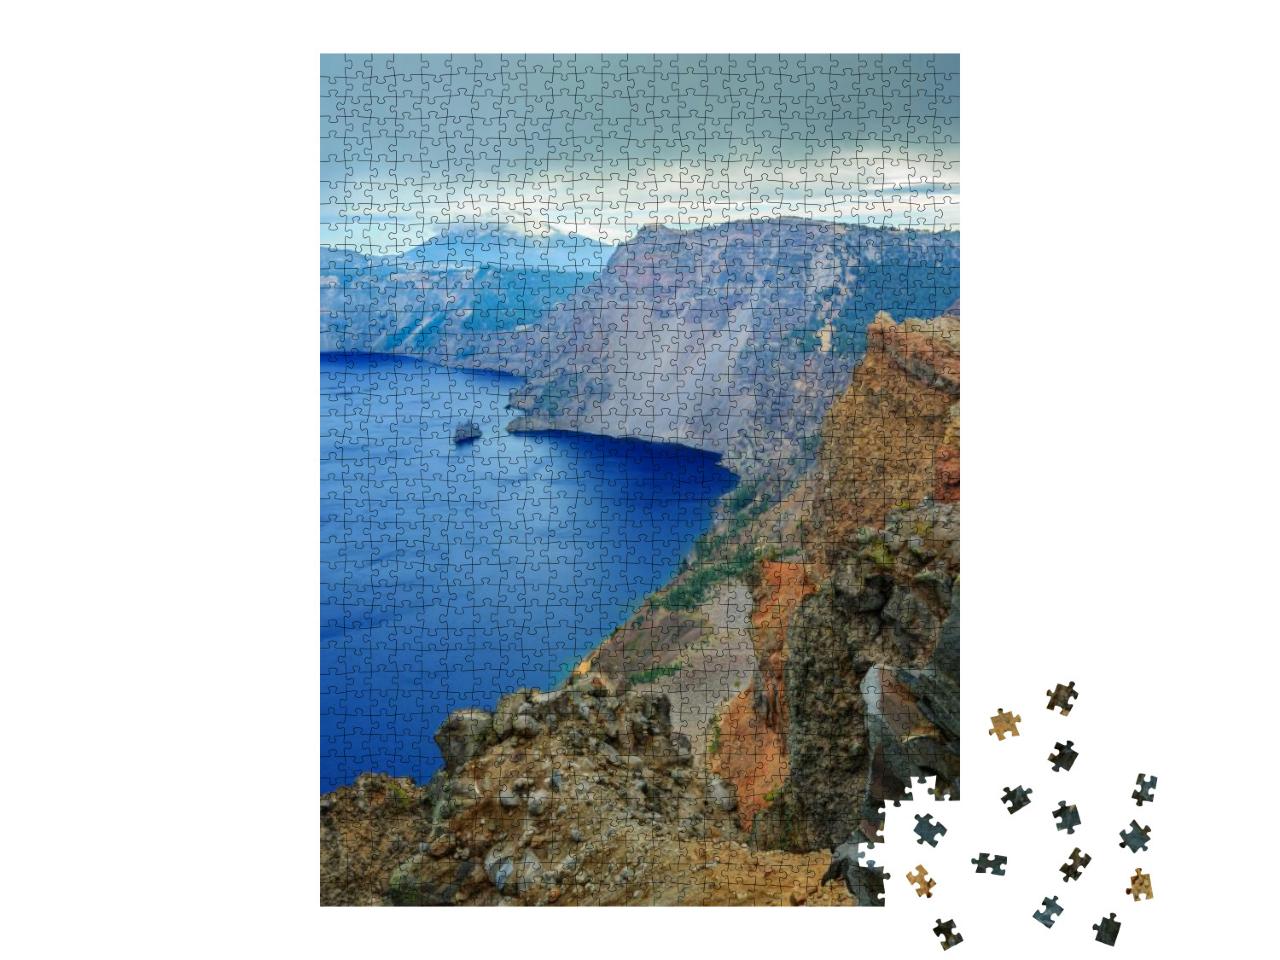 Crater Lake National Park, Oregon, Usa... Jigsaw Puzzle with 1000 pieces